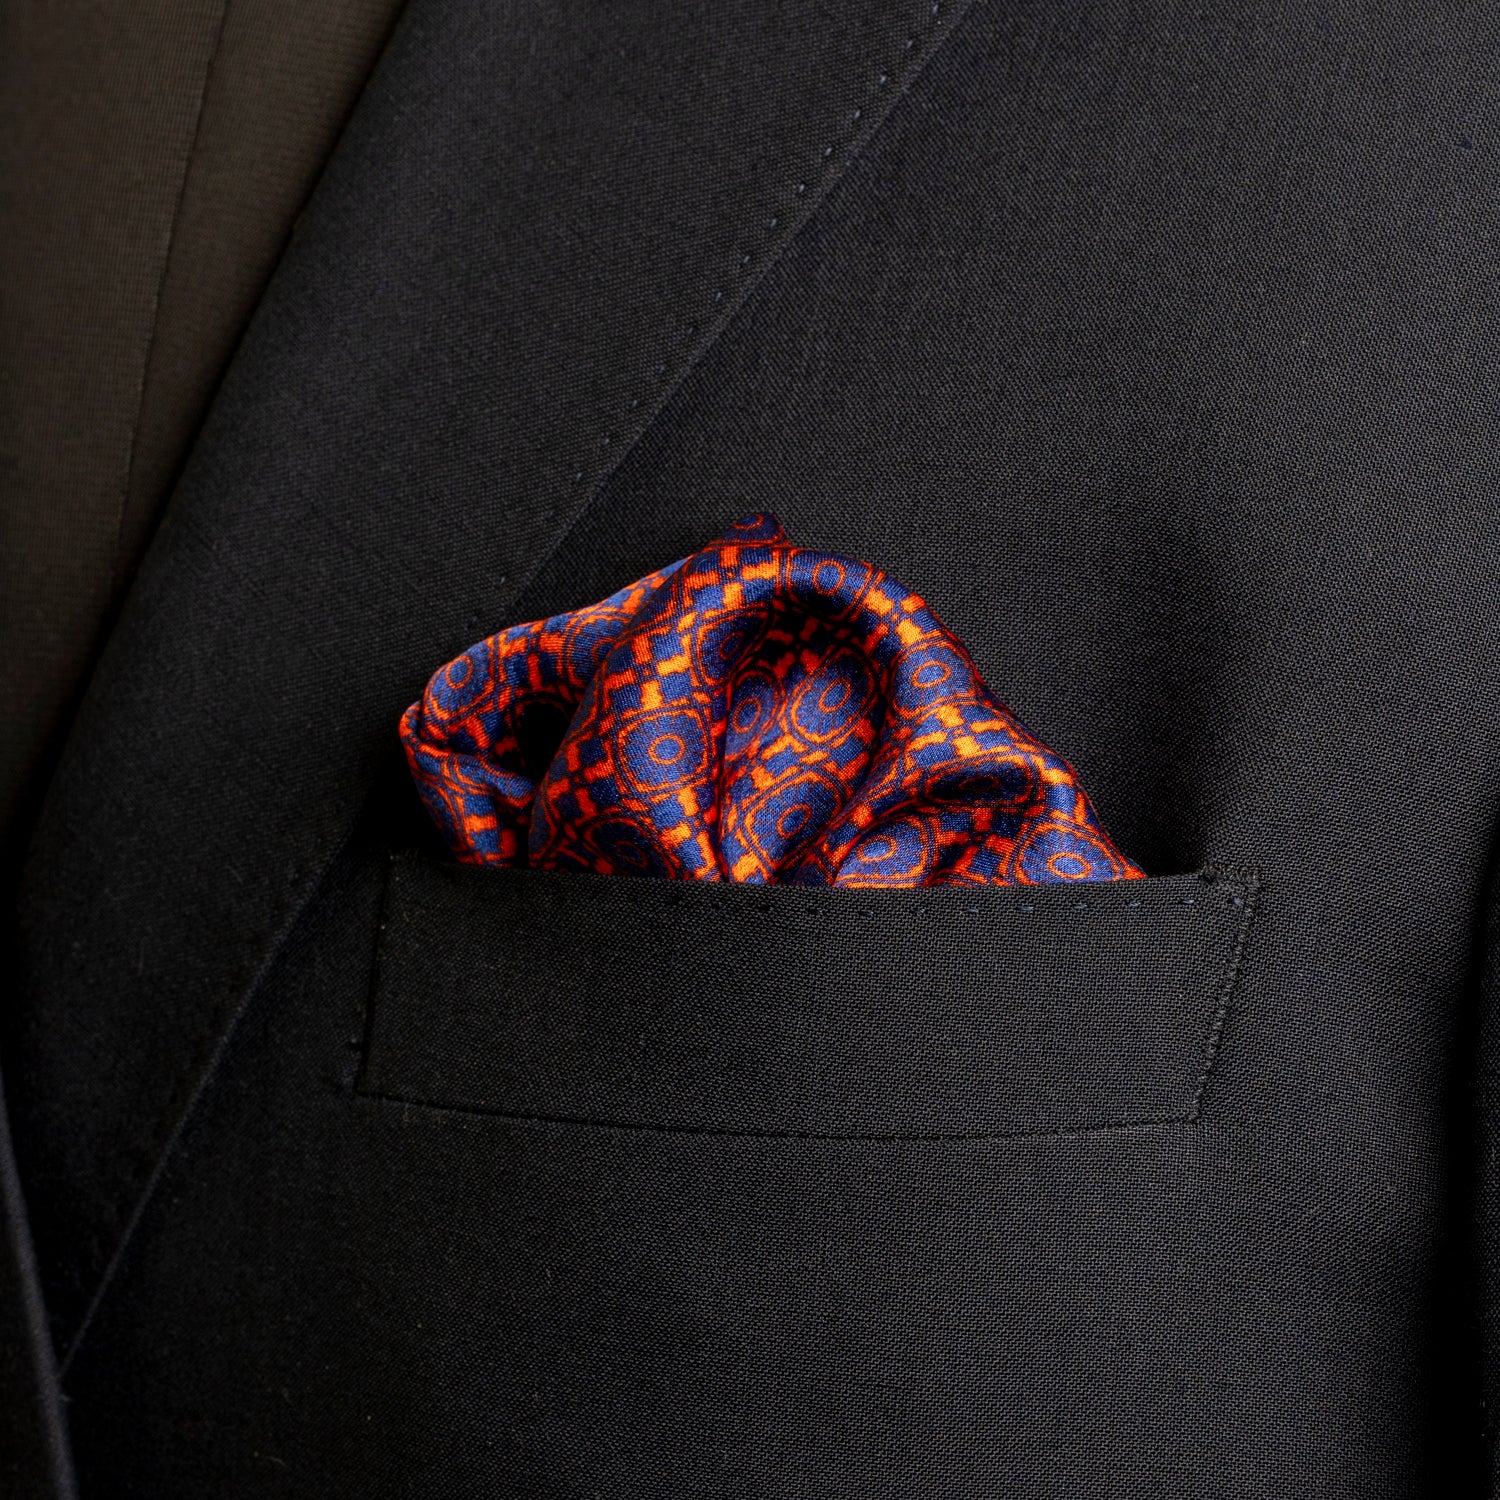 Chokore Red Satin Silk pocket square from the Plaids Line